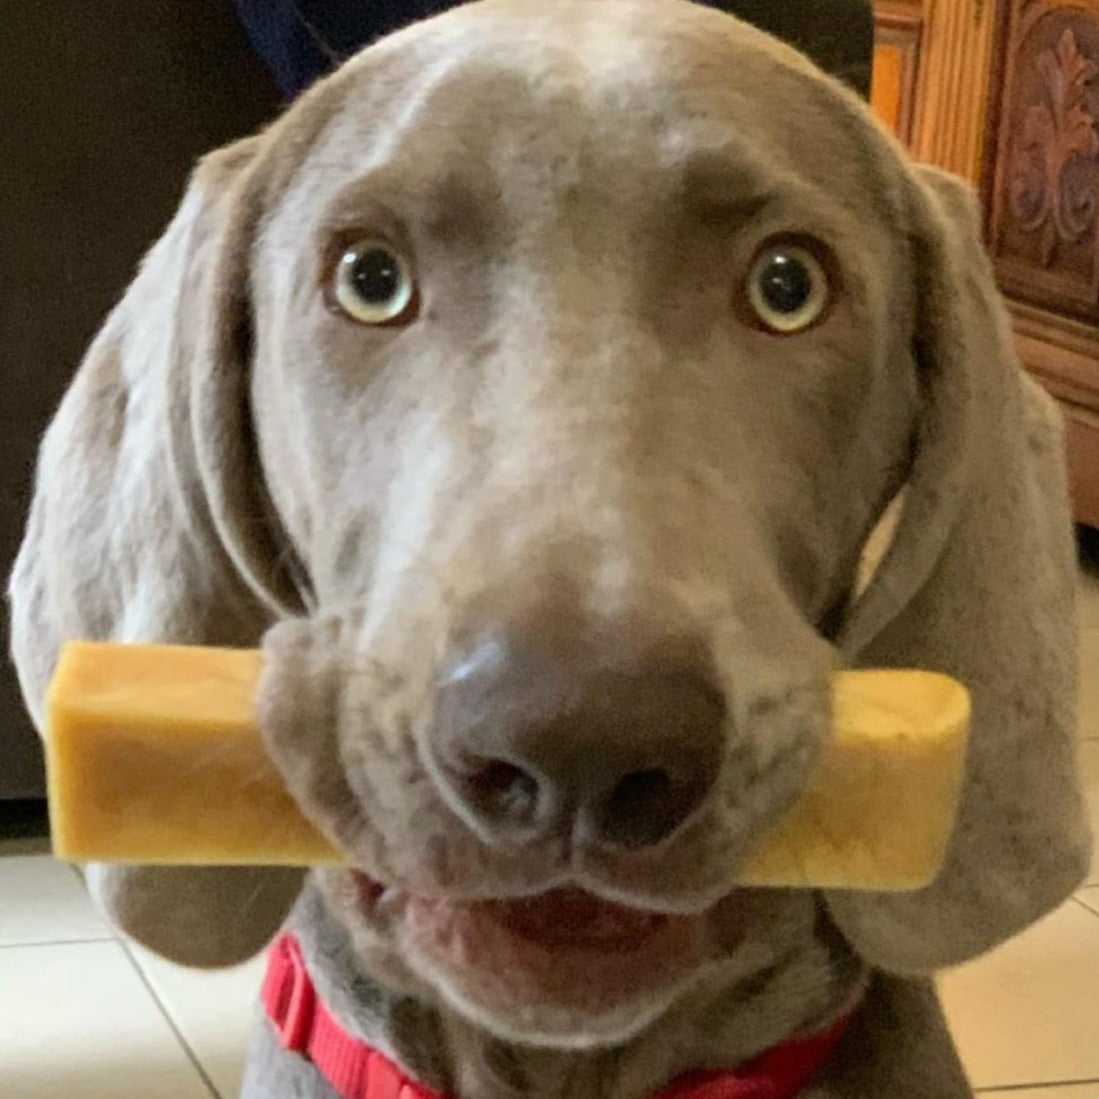 Weimeraner with himalayan yak chew from Bonza Dog Treats in his mouth